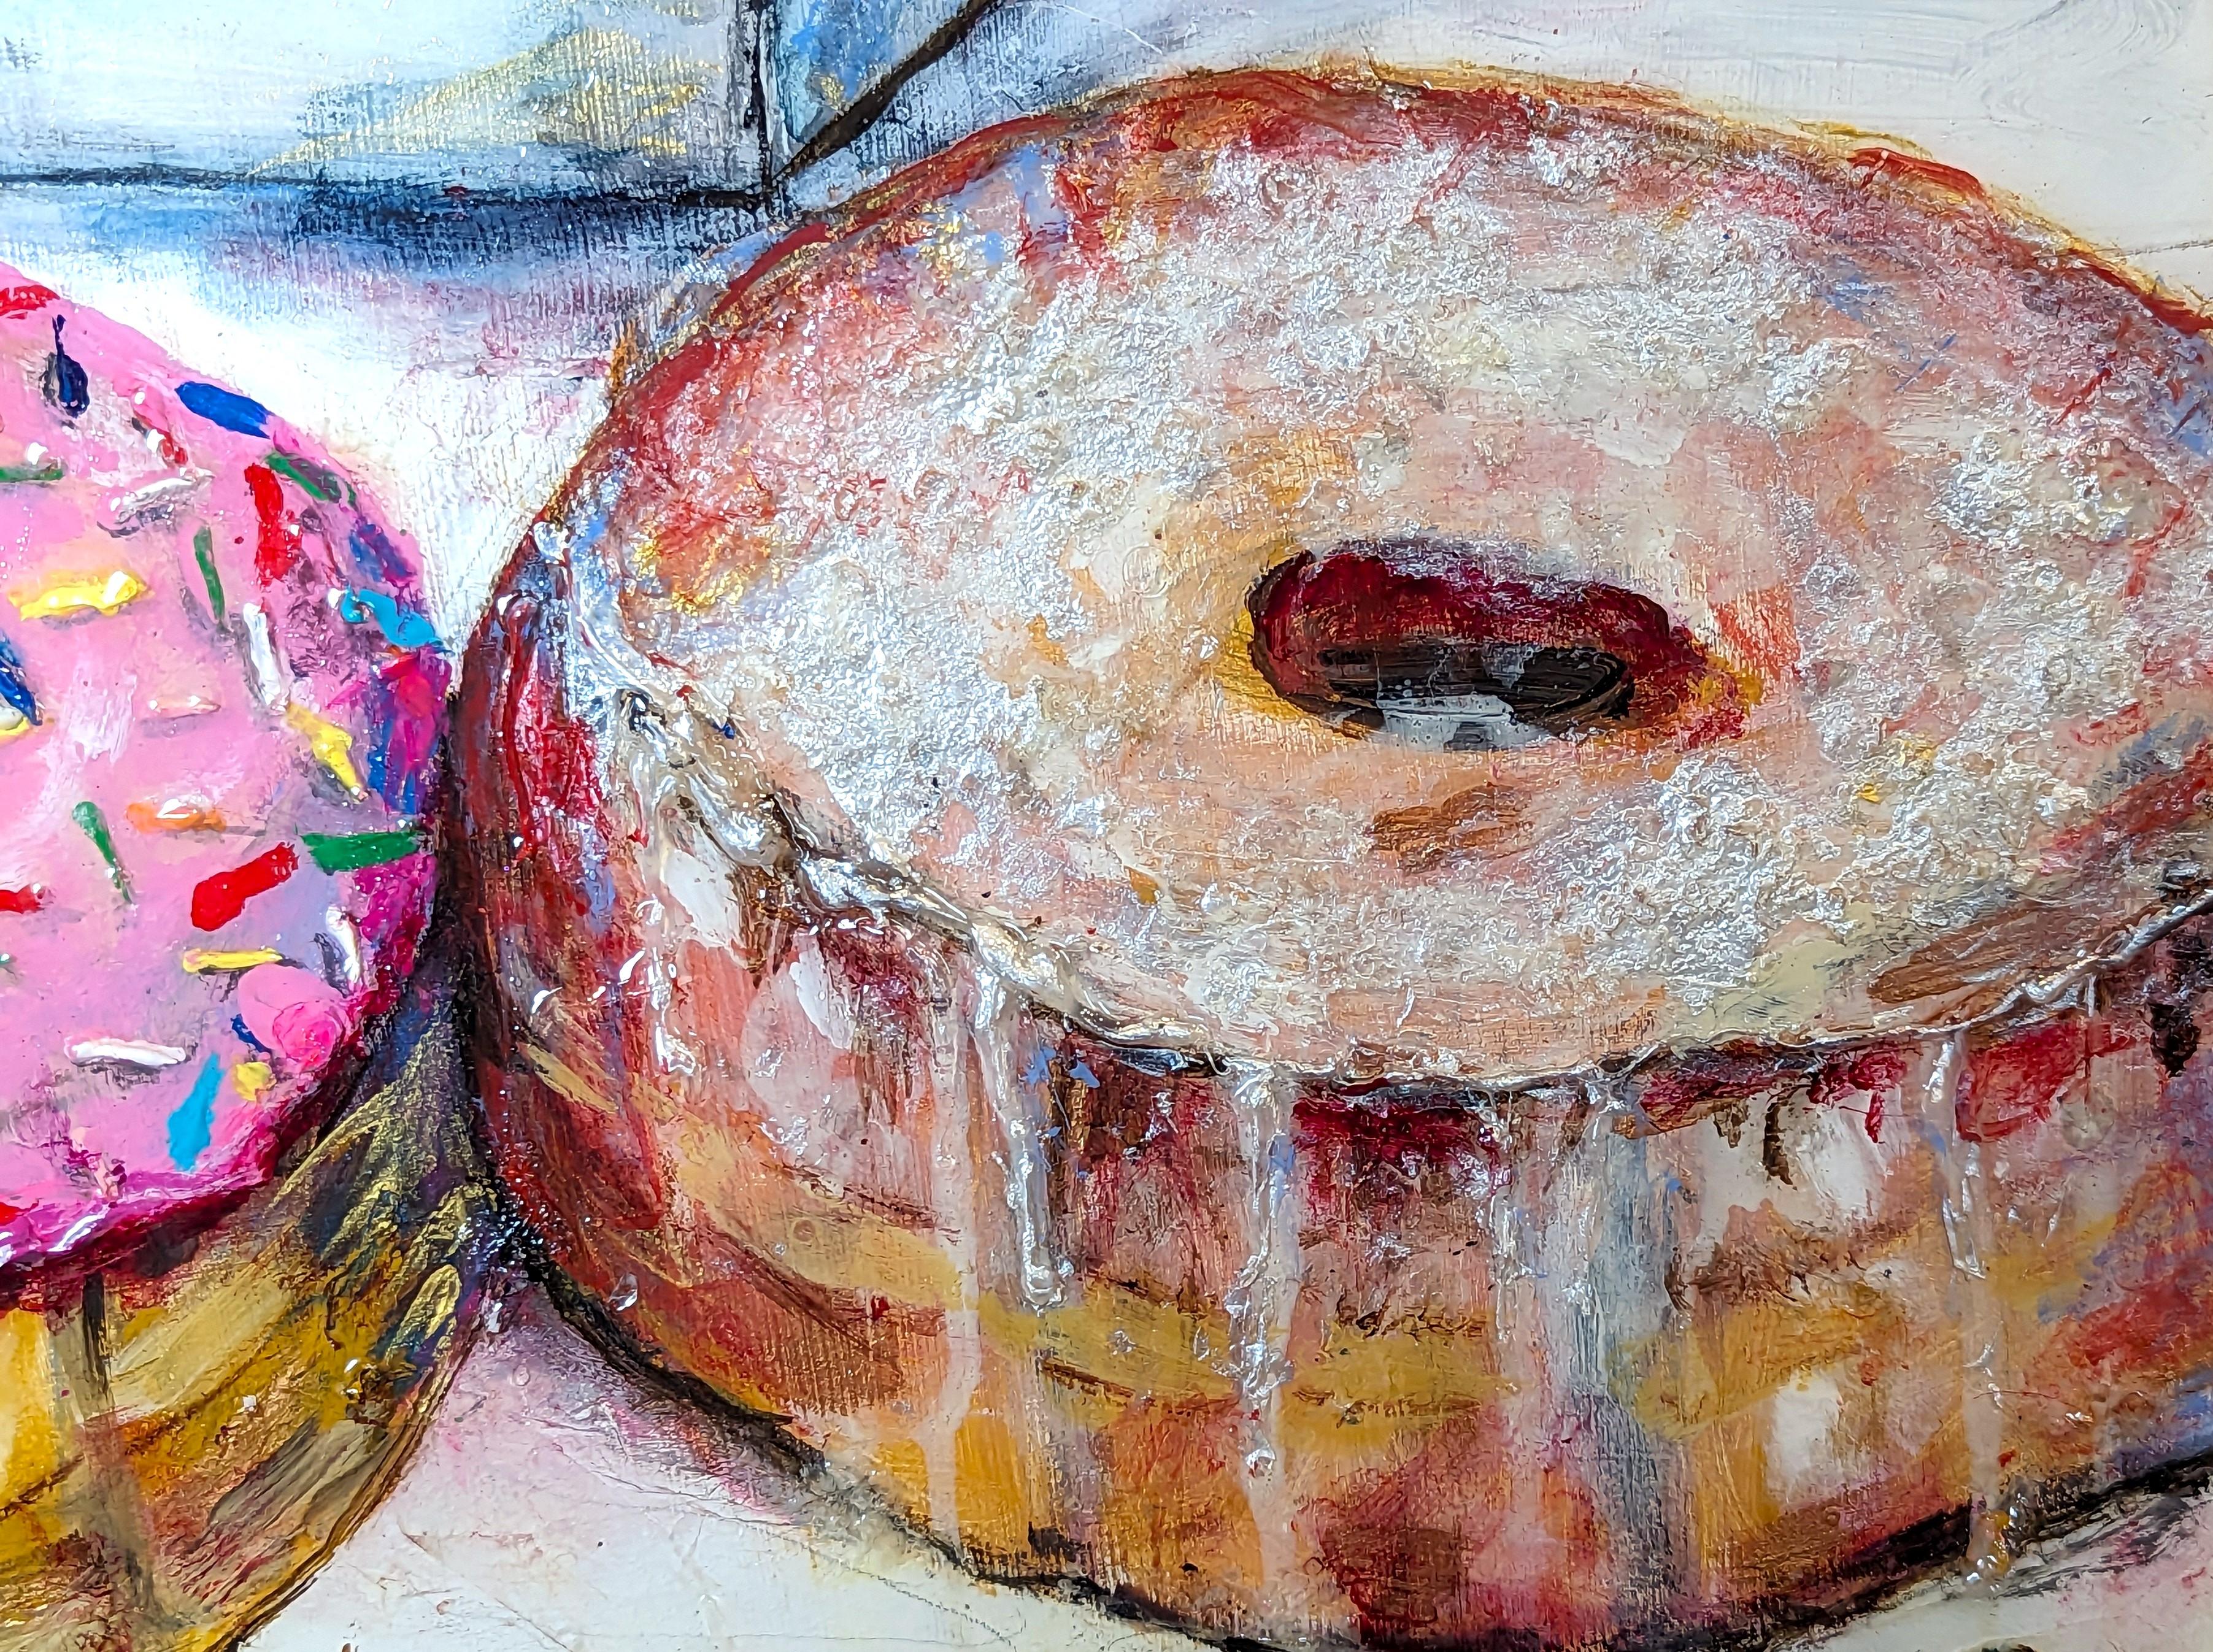 “Shipley's Do-Nuts” Contemporary Colorful Mixed Media Food Collage For Sale 7